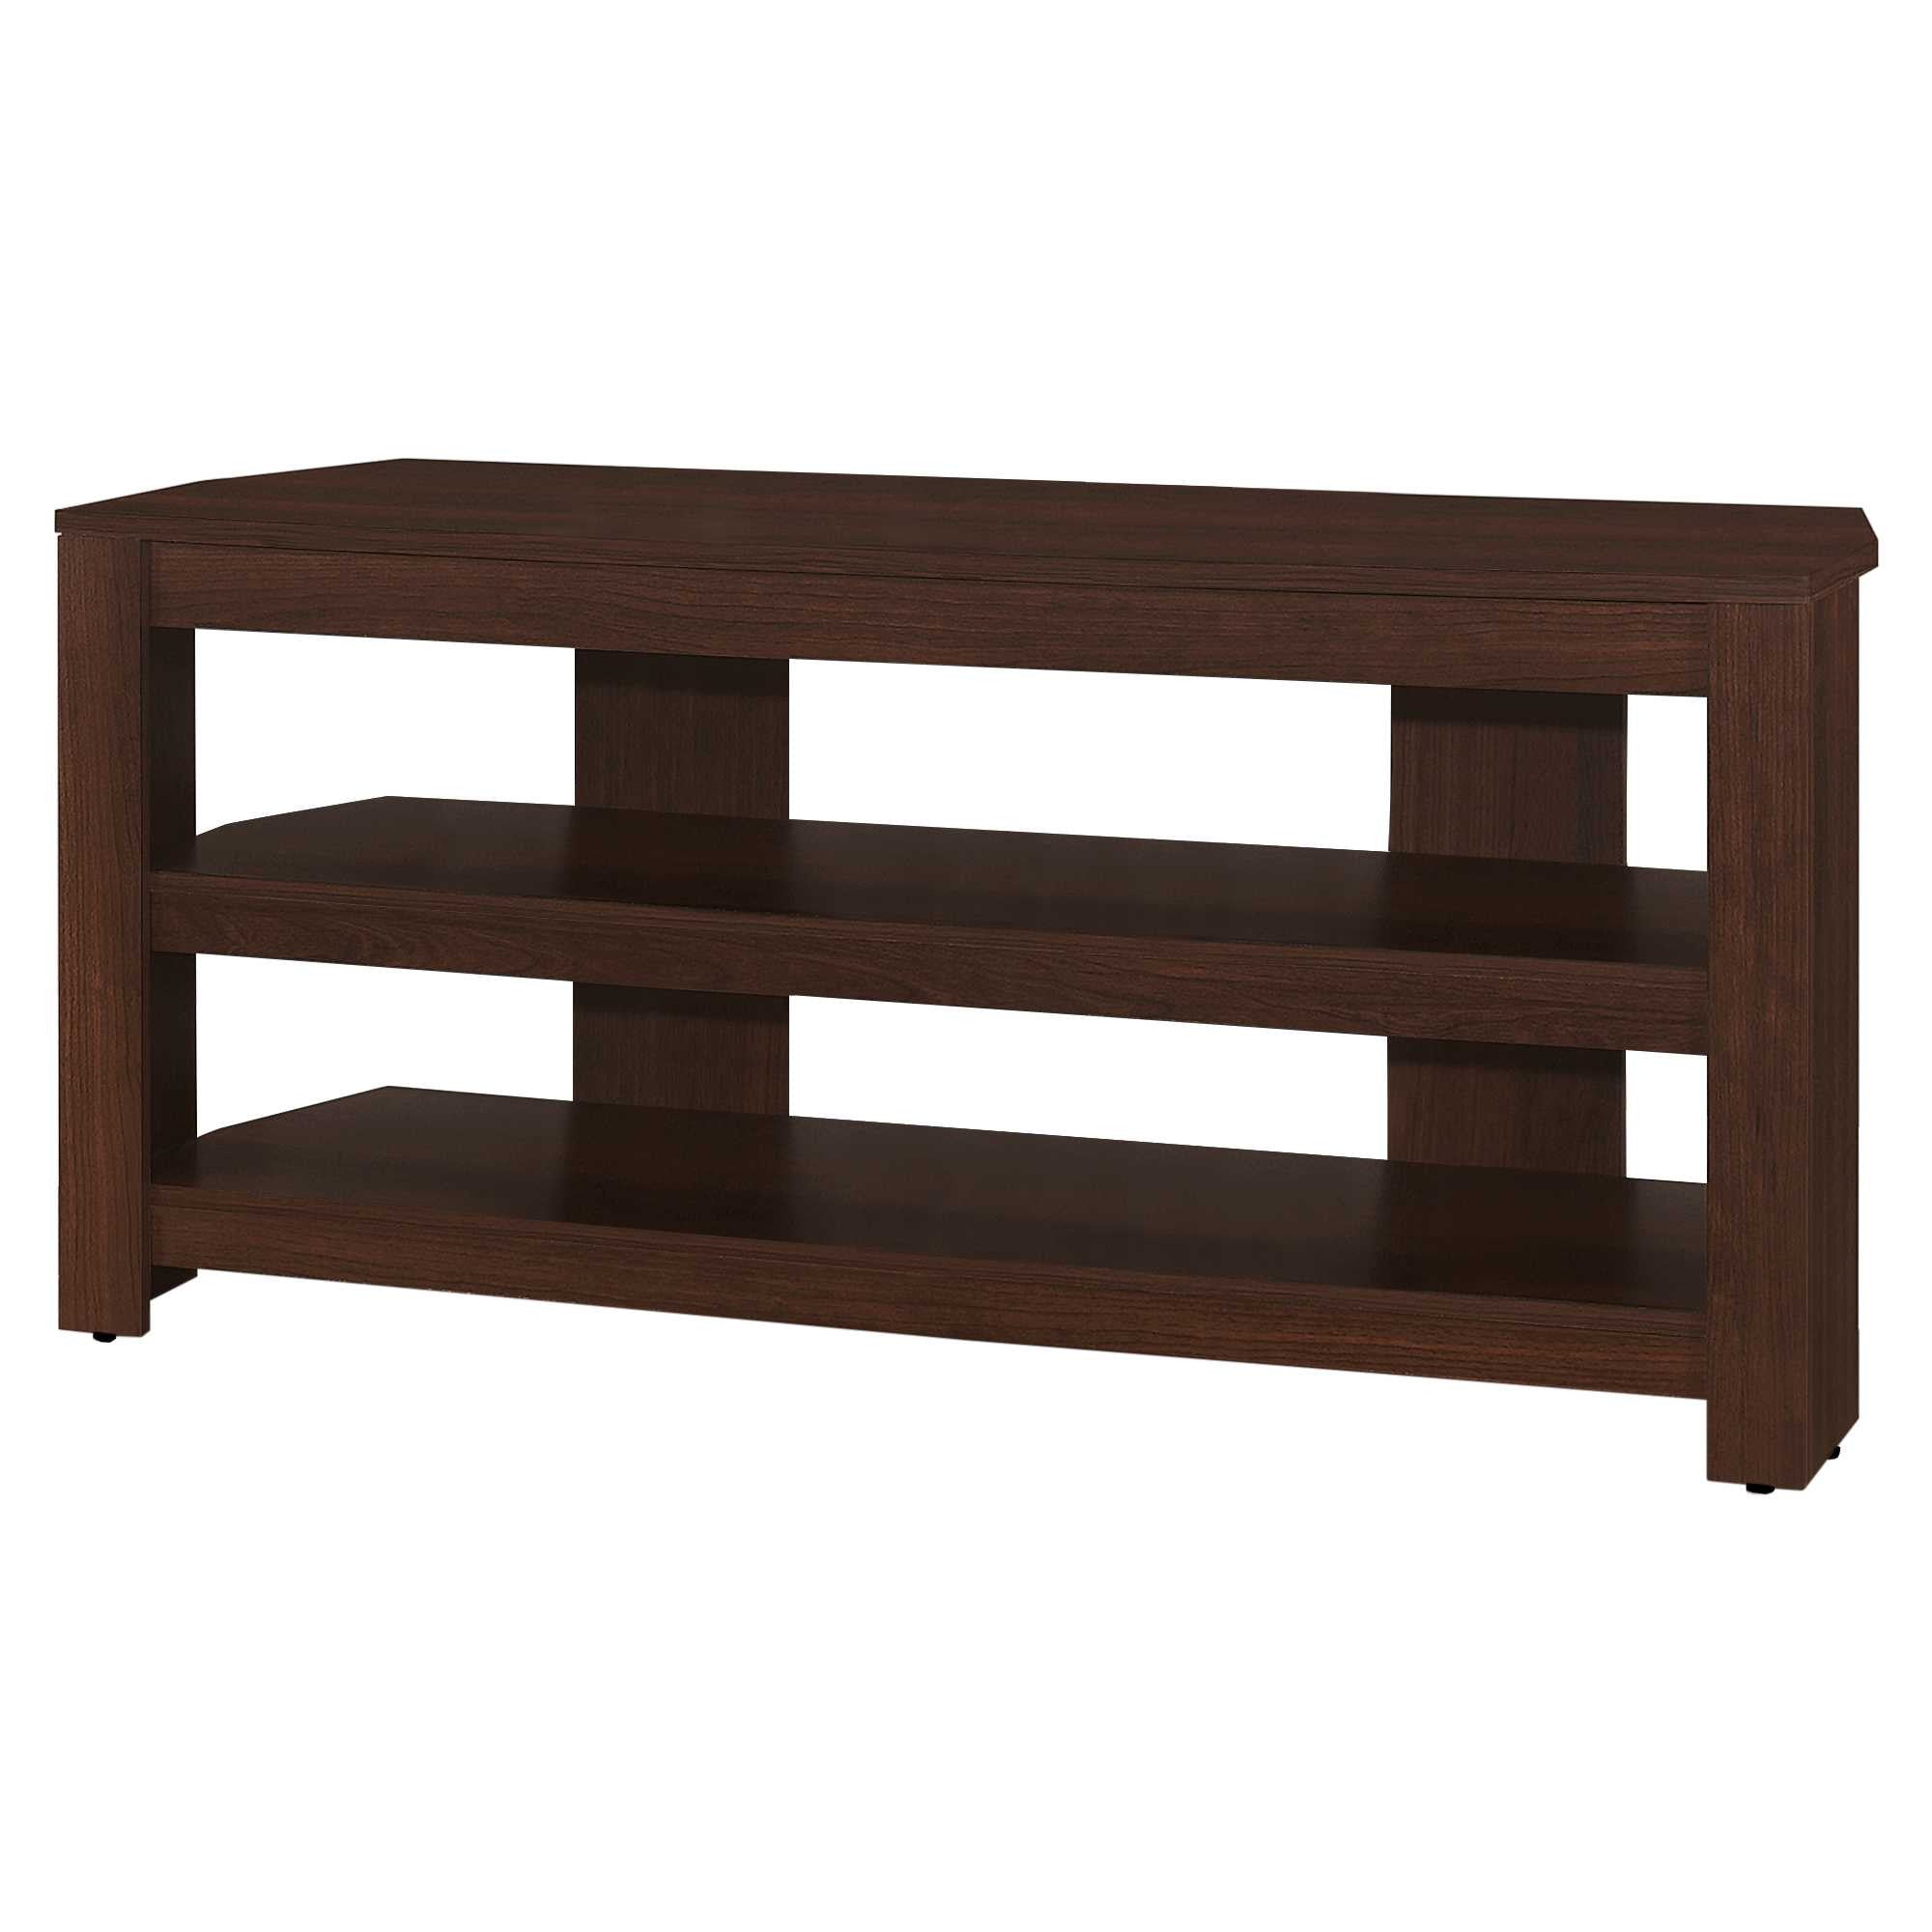 16" Dark Brown Particleboard Open Shelving TV Stand